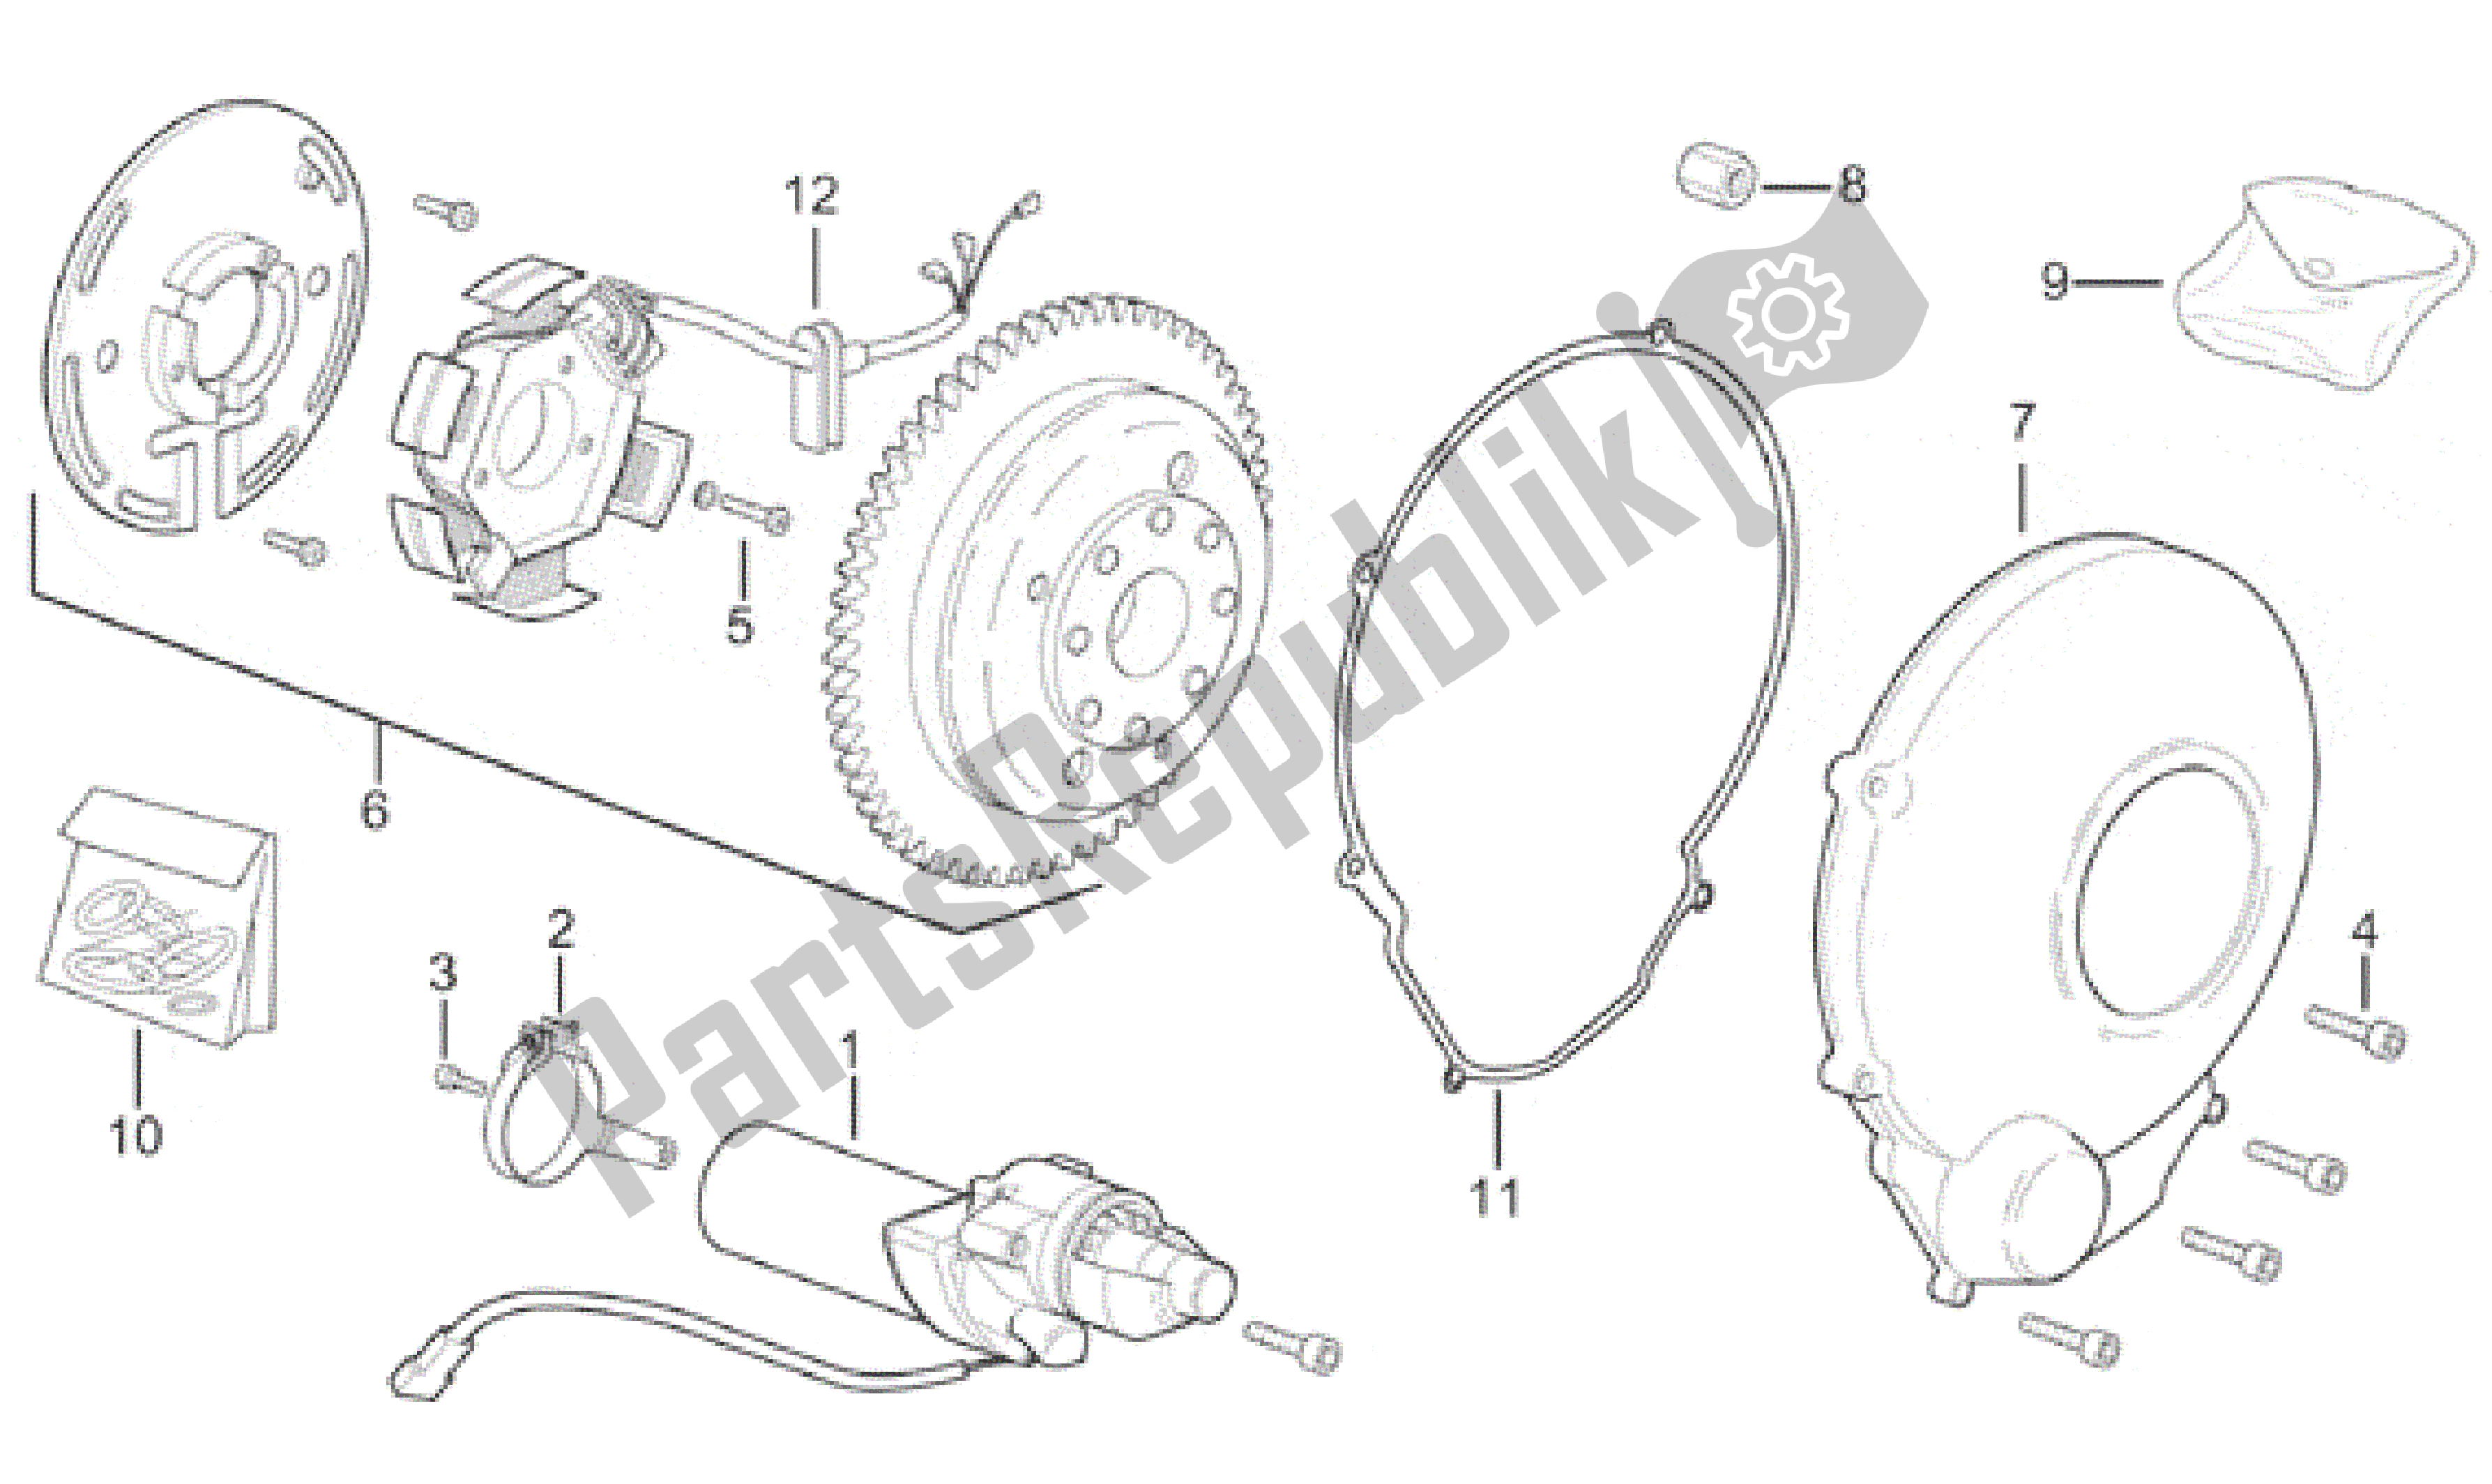 All parts for the Ignition Unit of the Aprilia RS 50 1996 - 1998